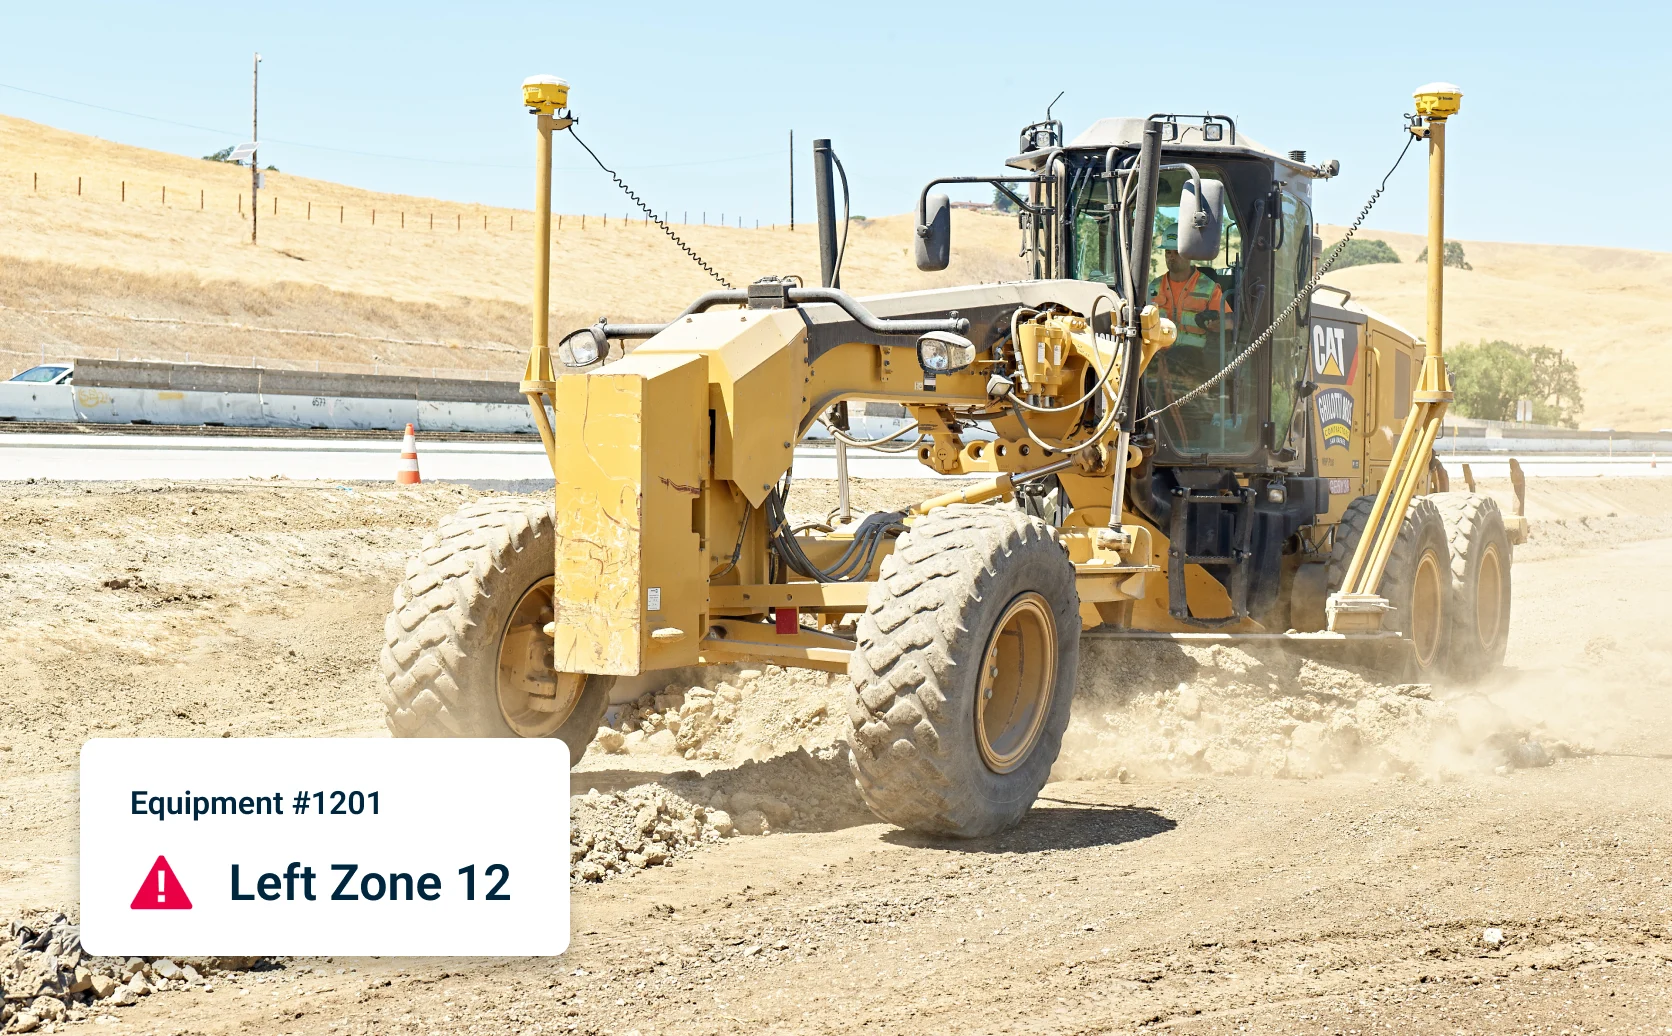 Image shows construction vehicle at a site.  Overlay shows Geofencing alert: Equipment #1201 Left Zone 12